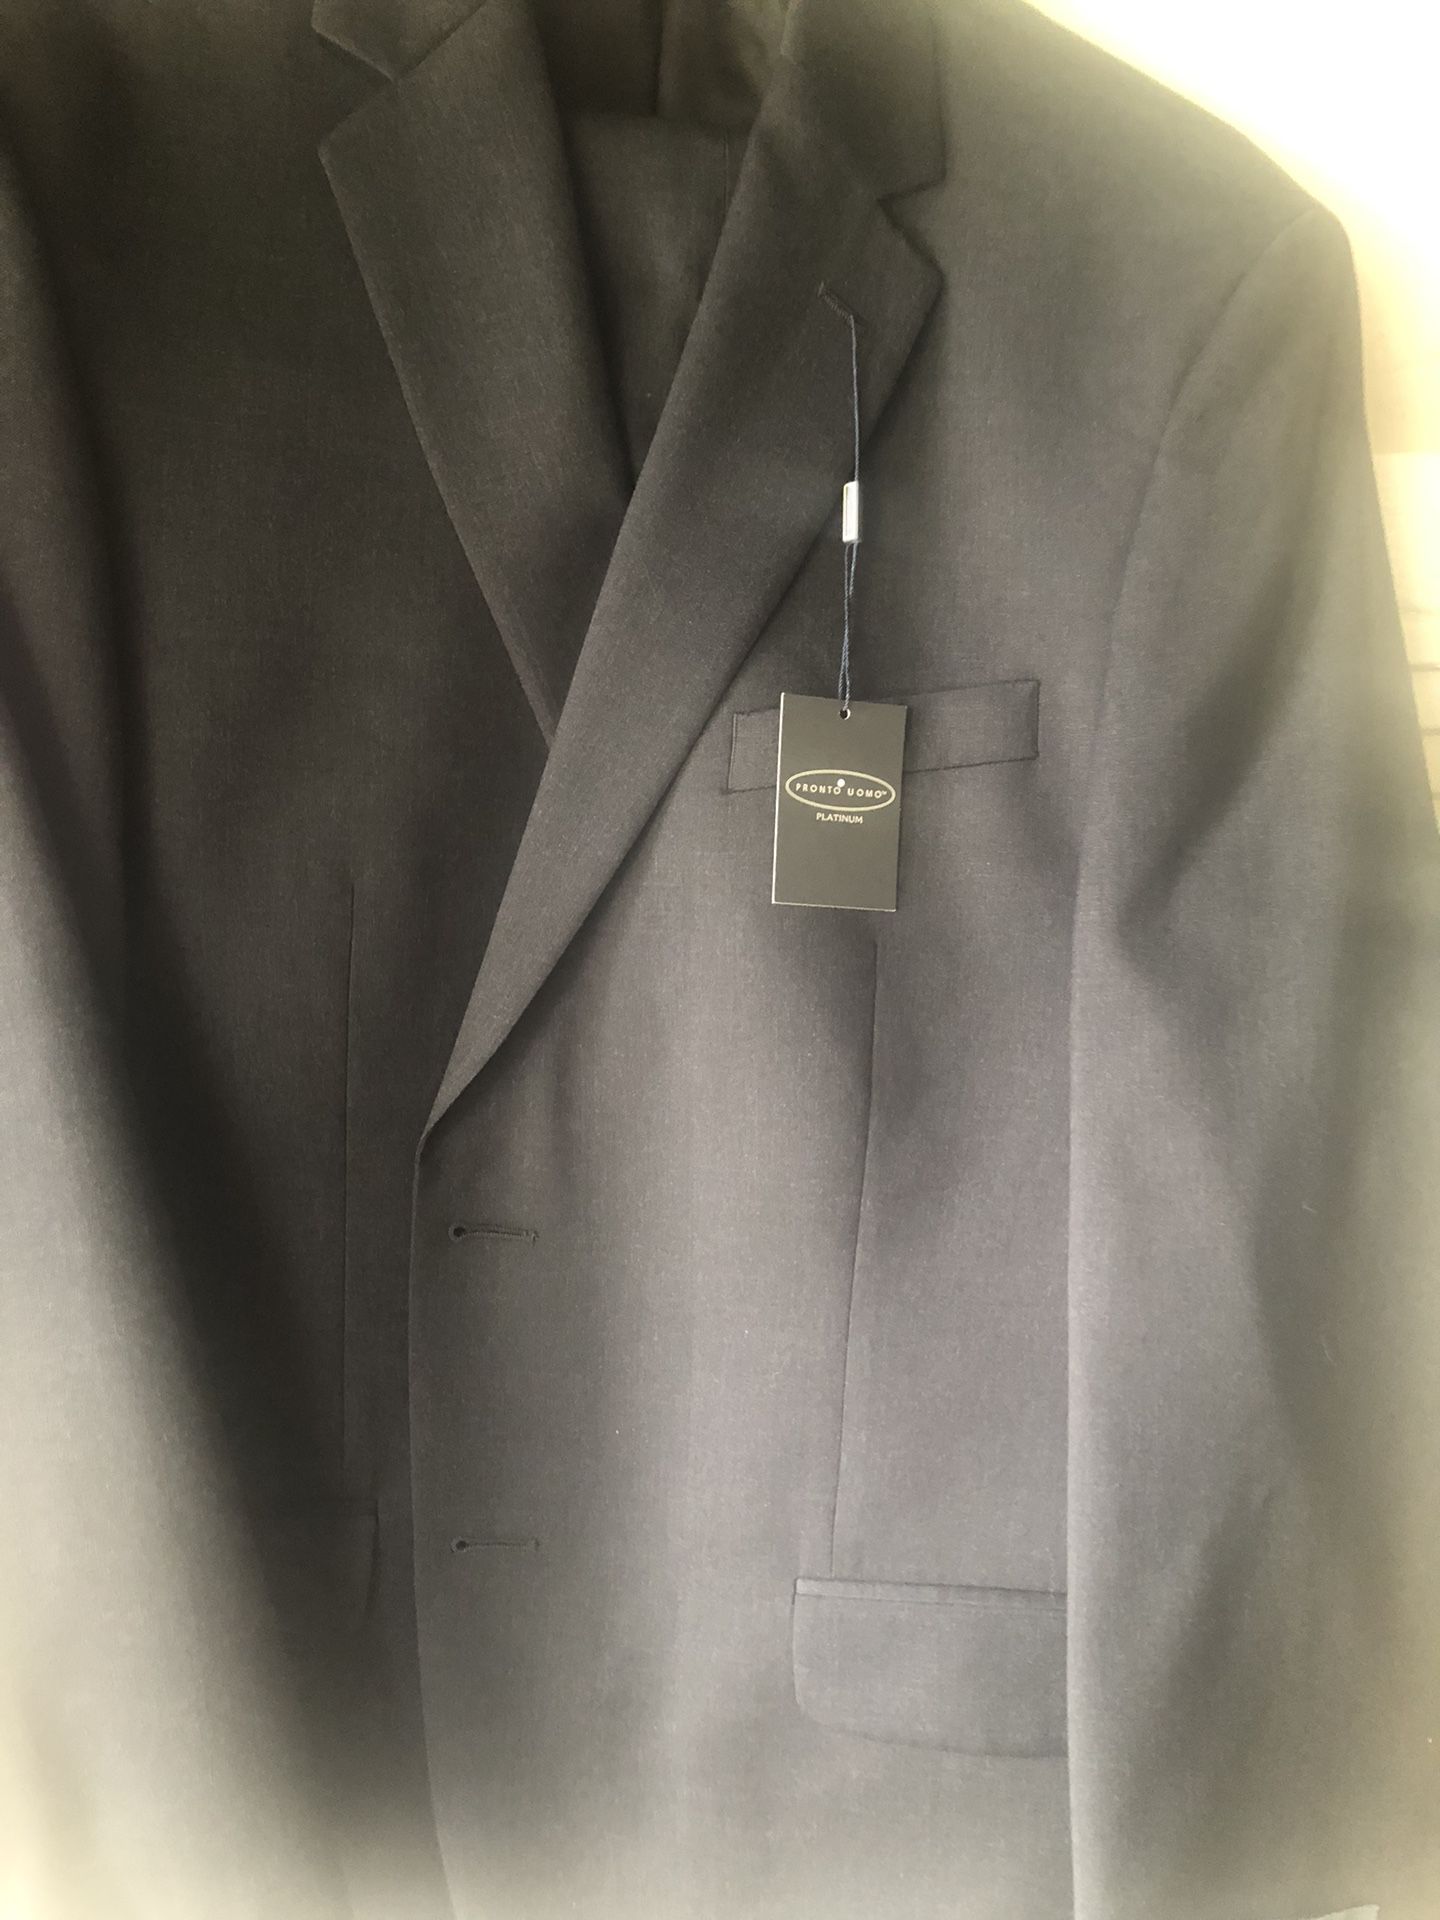 44r Charcoal Gray Suit With 38r Pants